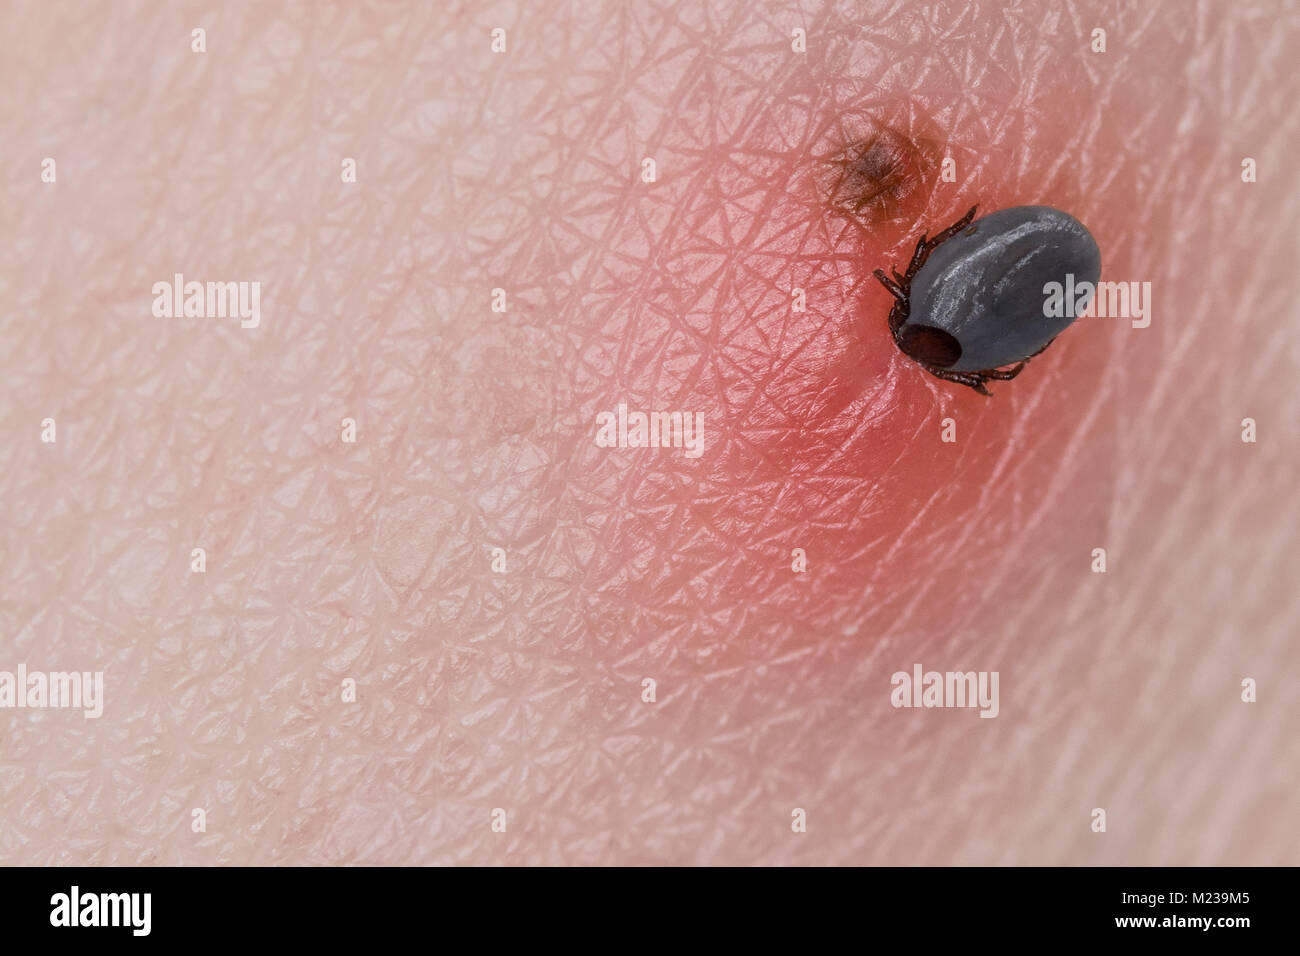 Tick and freckle. Ixodes ricinus. Close-up of small parasitic mite when sucking blood on human skin with the birthmark. Encephalitis, Lyme disease. Stock Photo